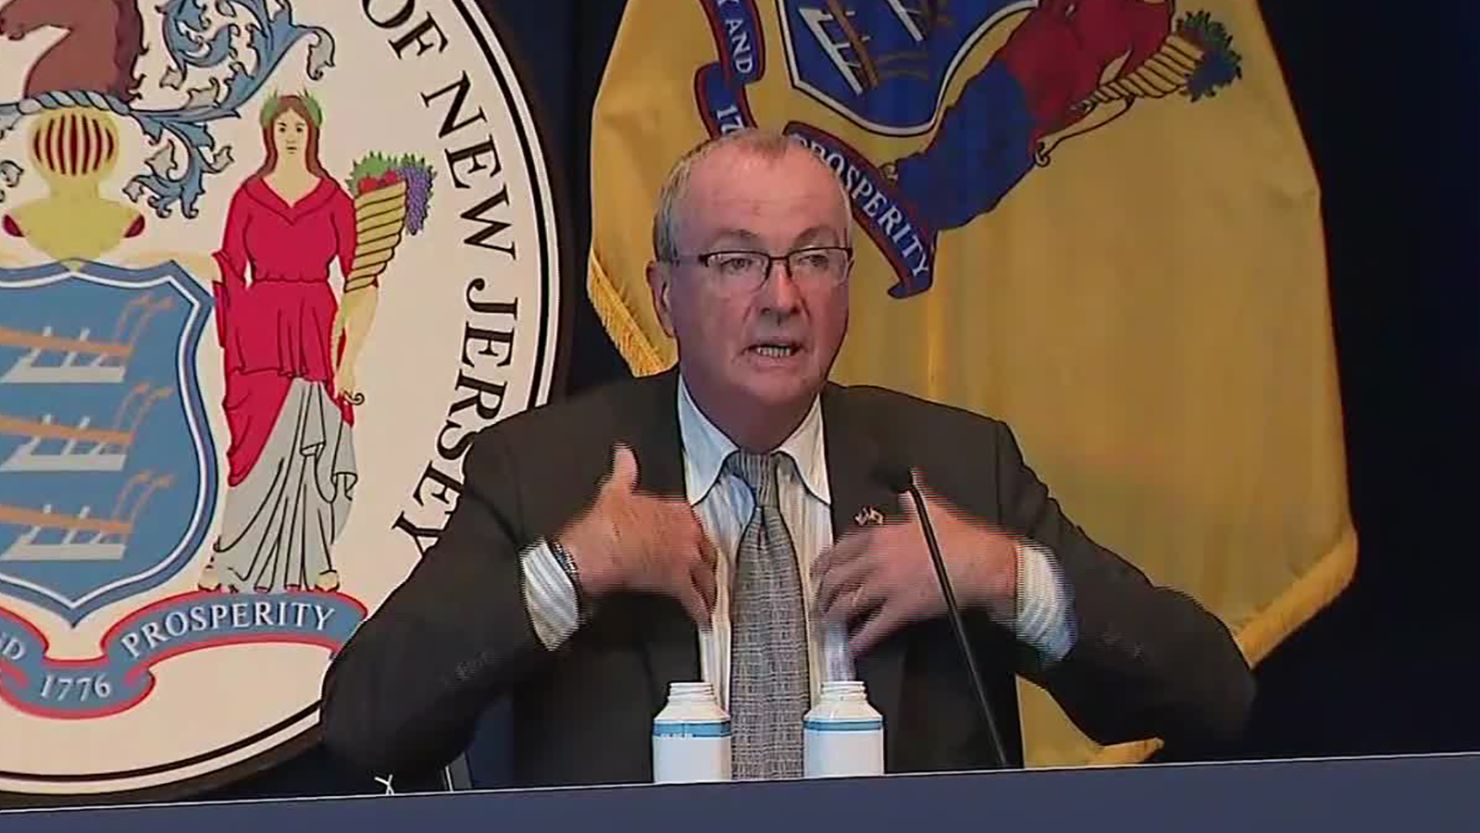 "It was irresponsible from top to bottom in every respect," Gov. Phil Murphy said Wednesday.